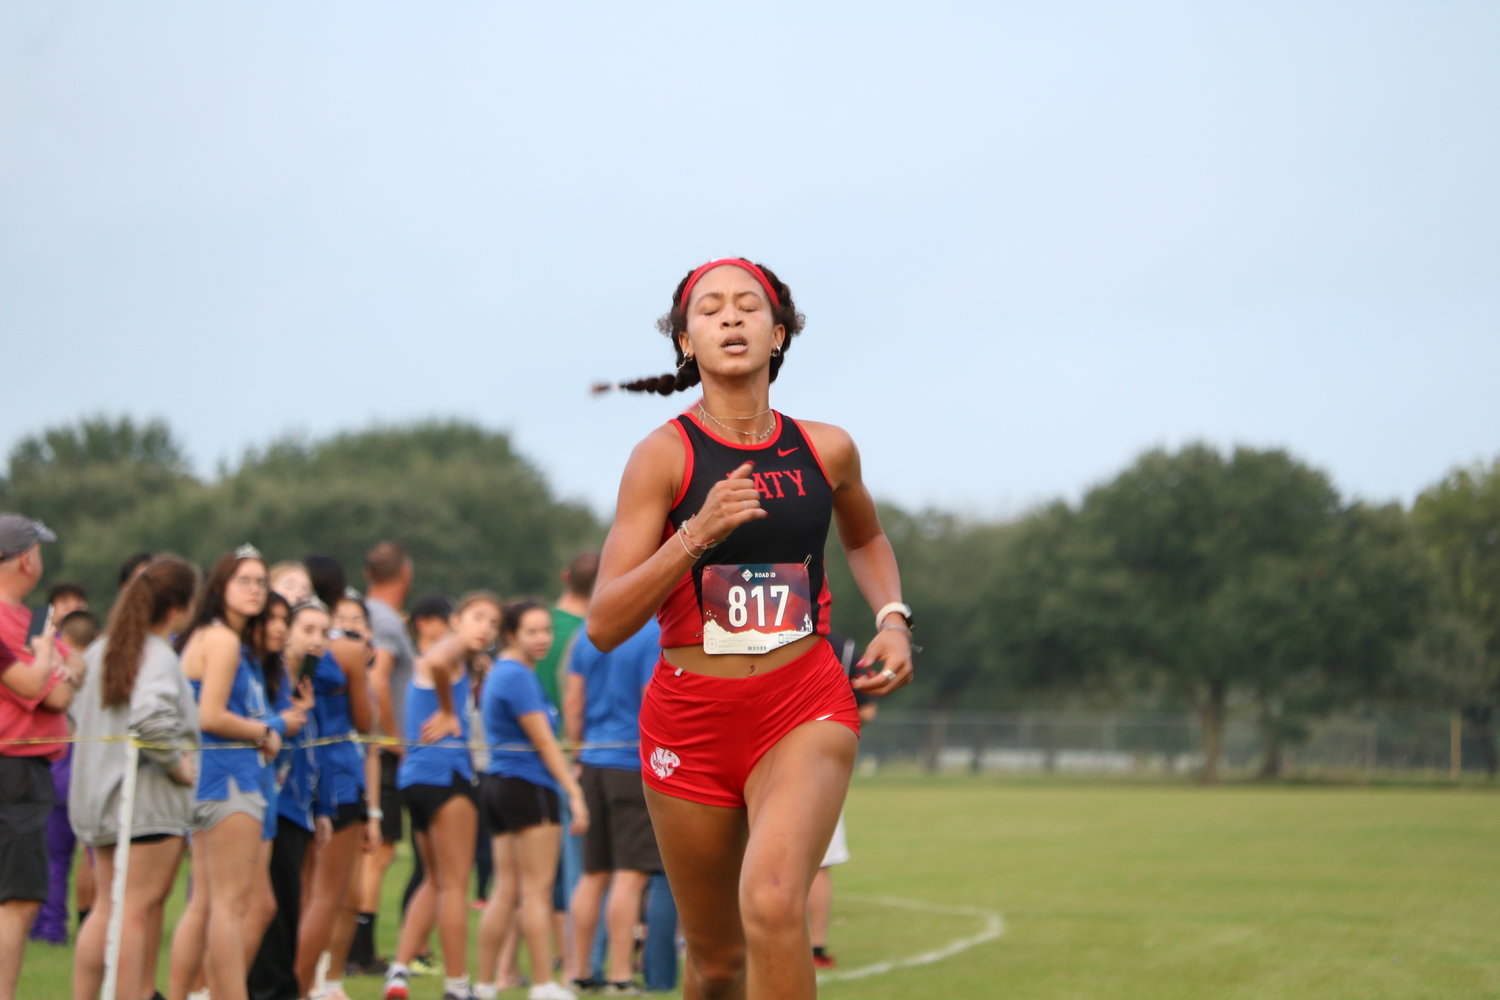 Isabella Rubio won gold at the Region III 6A cross country meet Monday and helped lead Katy to a third place finish as a team to qualify for state.